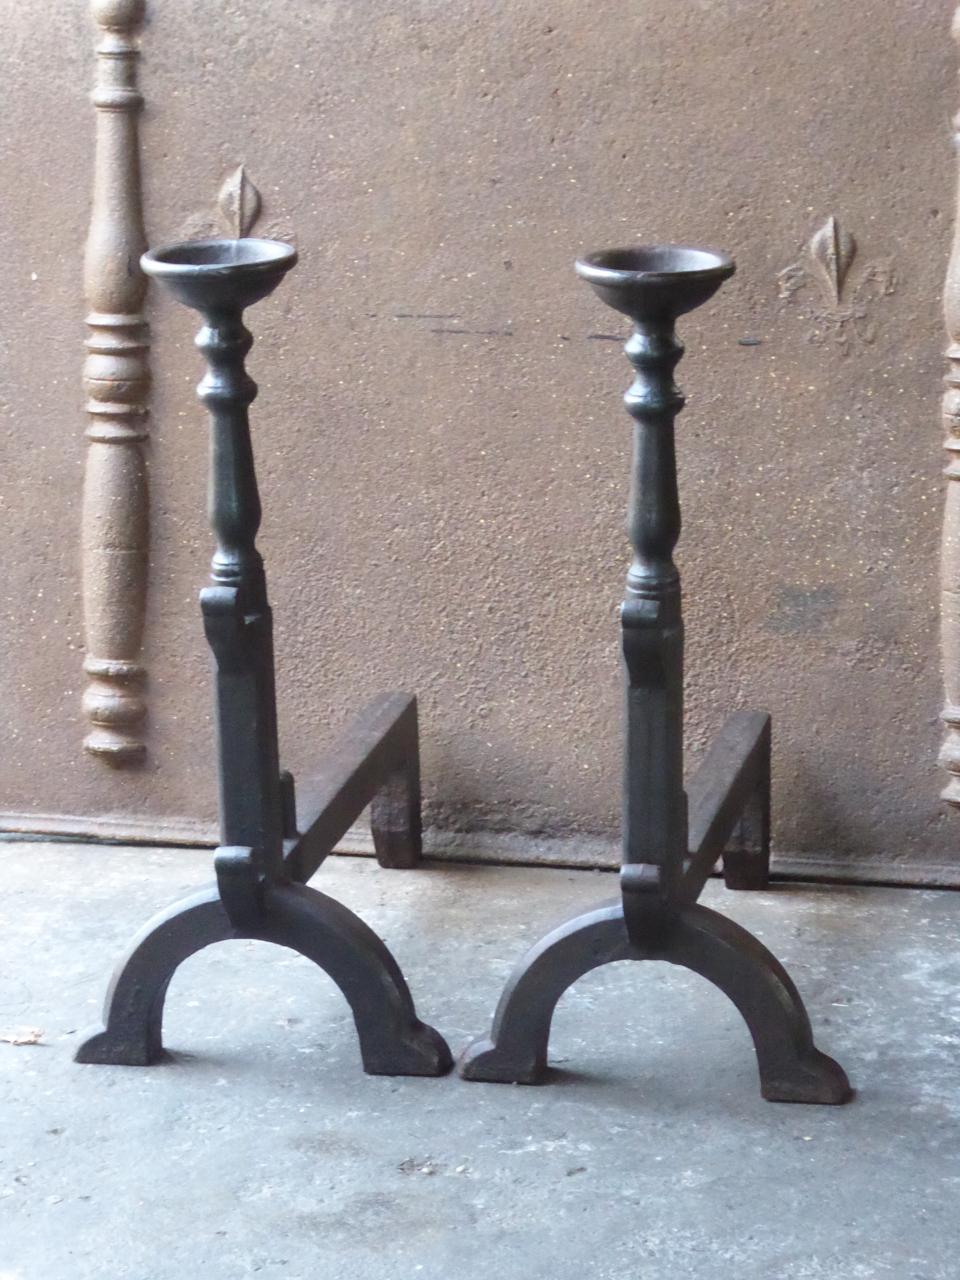 French Gothic style andirons made of cast iron. The andirons have spit hooks to grill food and cups to keep drinks warm. In France this originally very old type of andirons are called 'landiers'.

We have a unique and specialized collection of